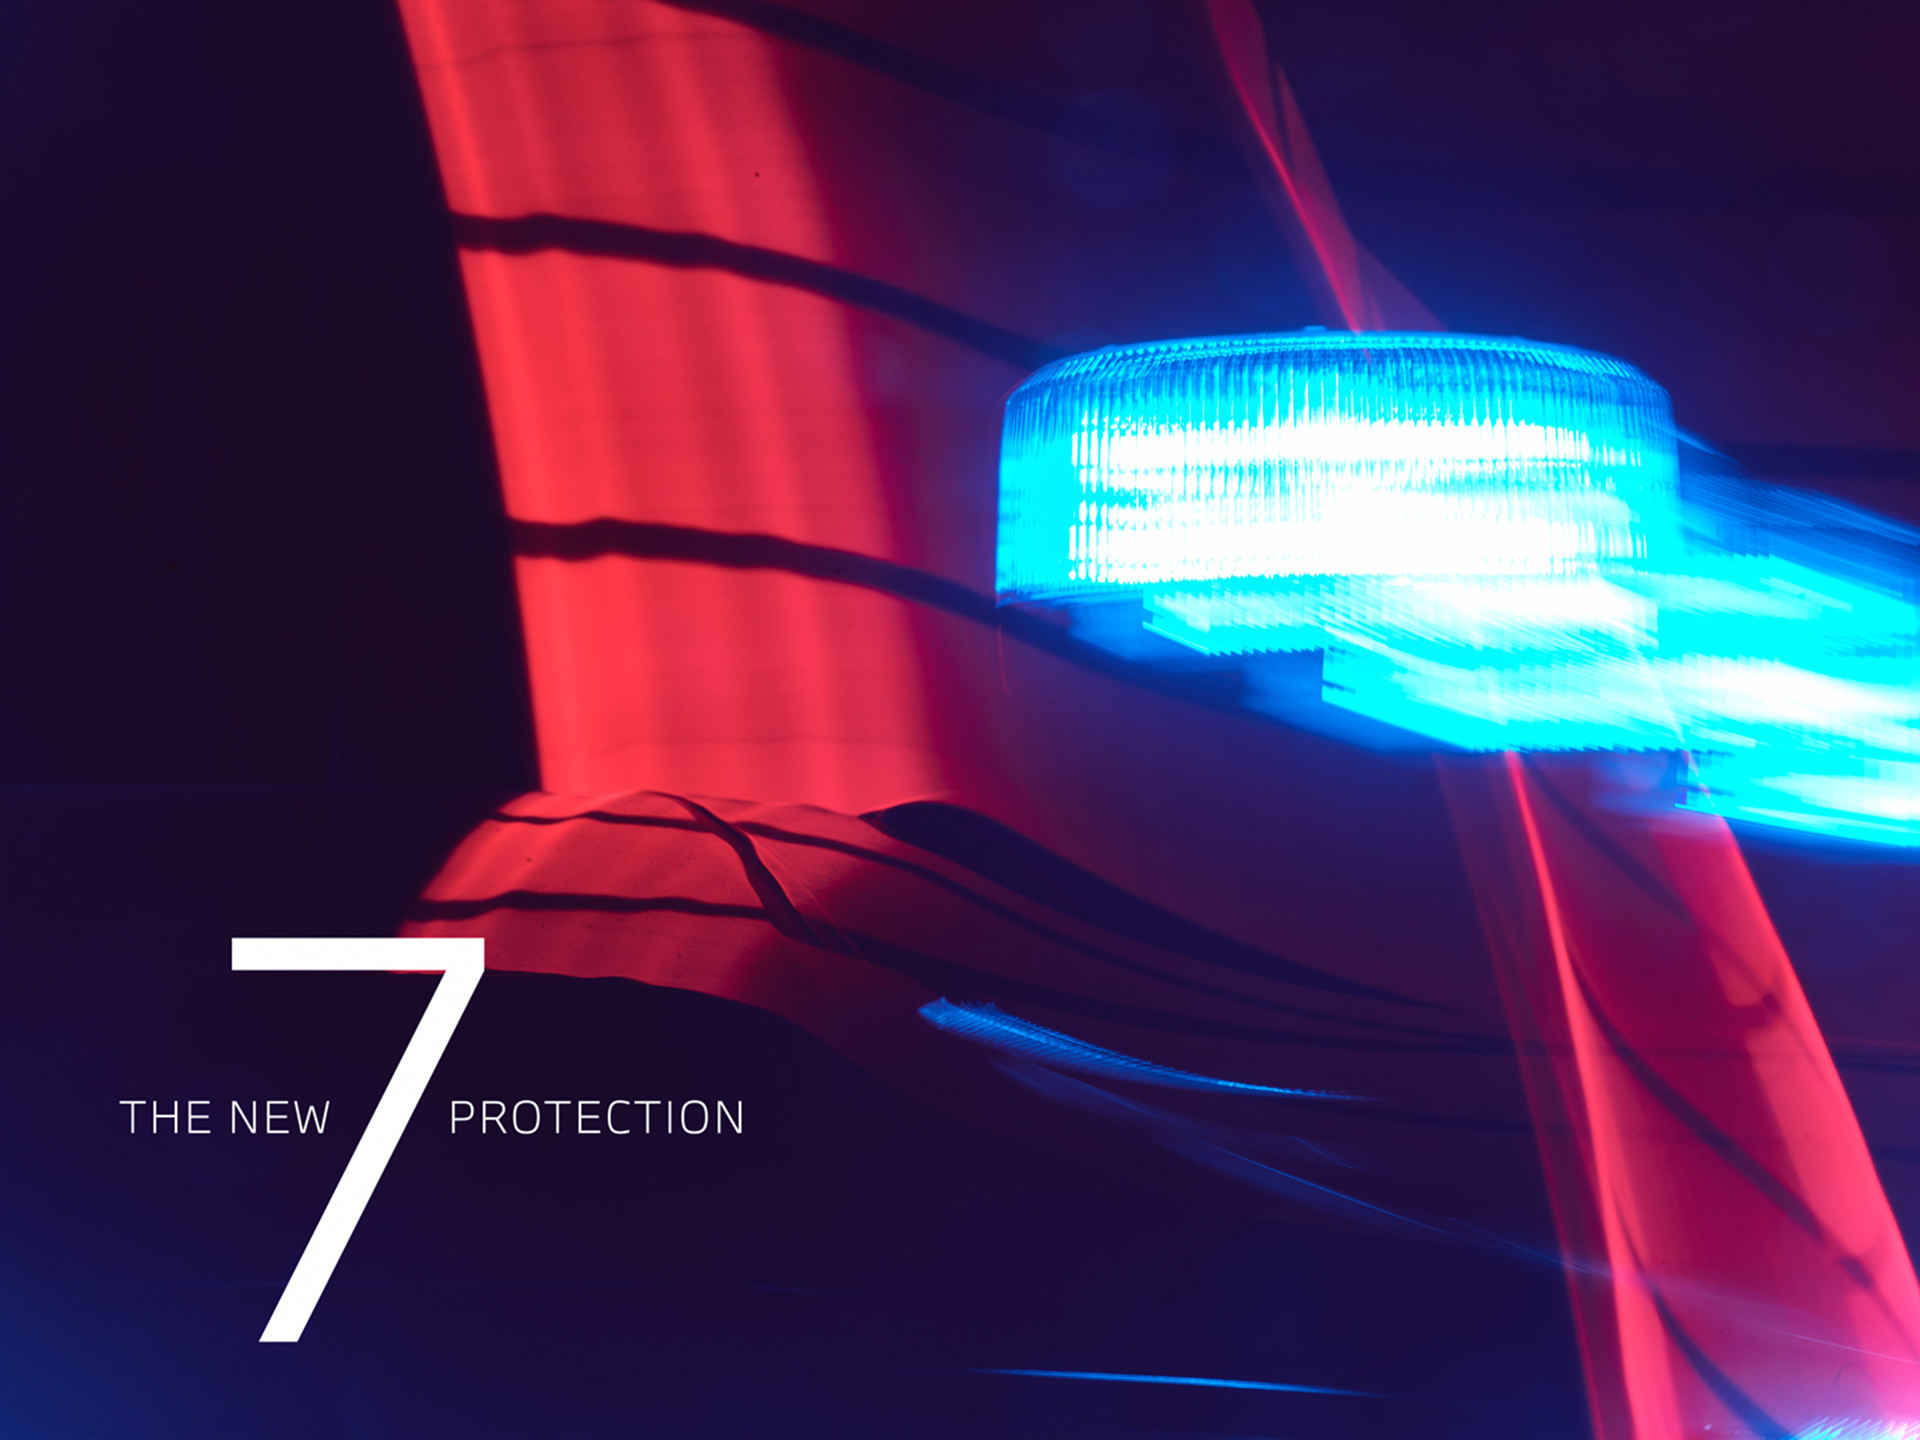 BWM G73 THE NEW 7 PROTECTION